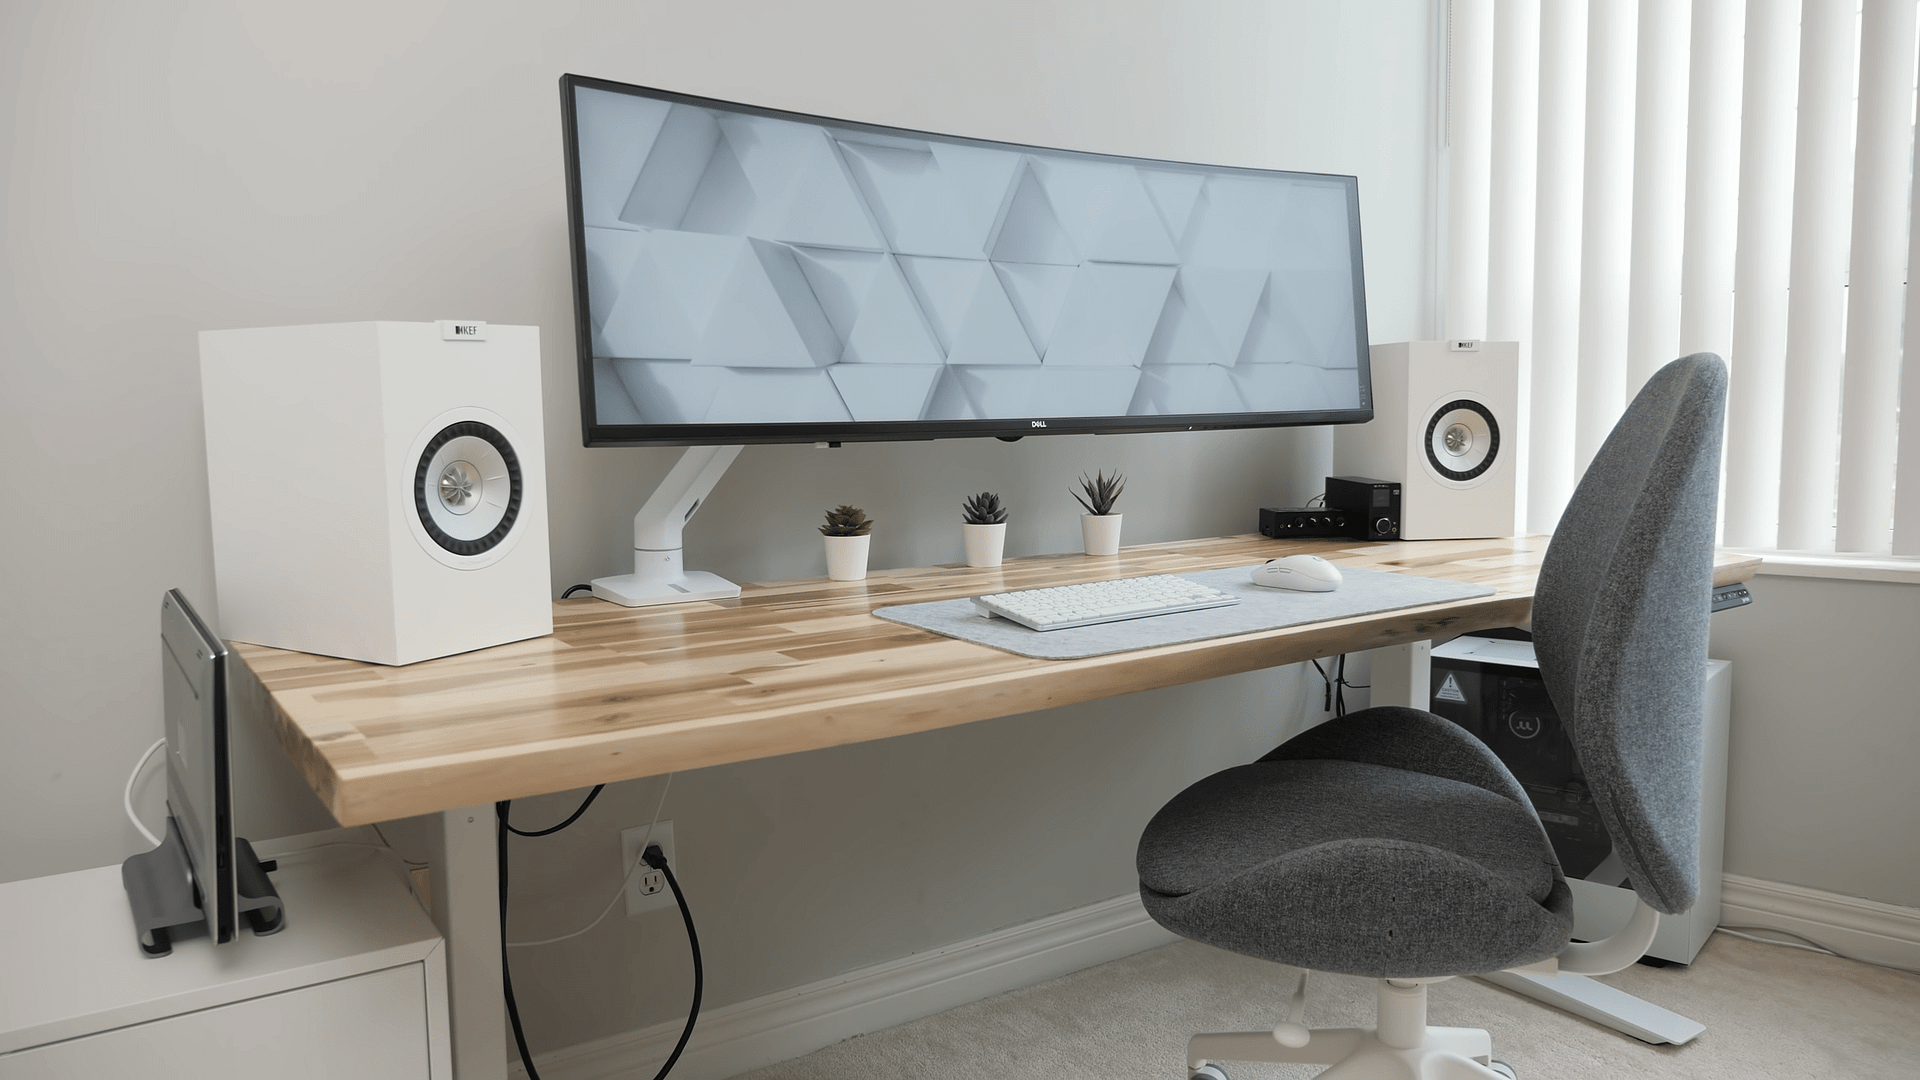 A minimalist home office setup against on a natural wood desk against a white background